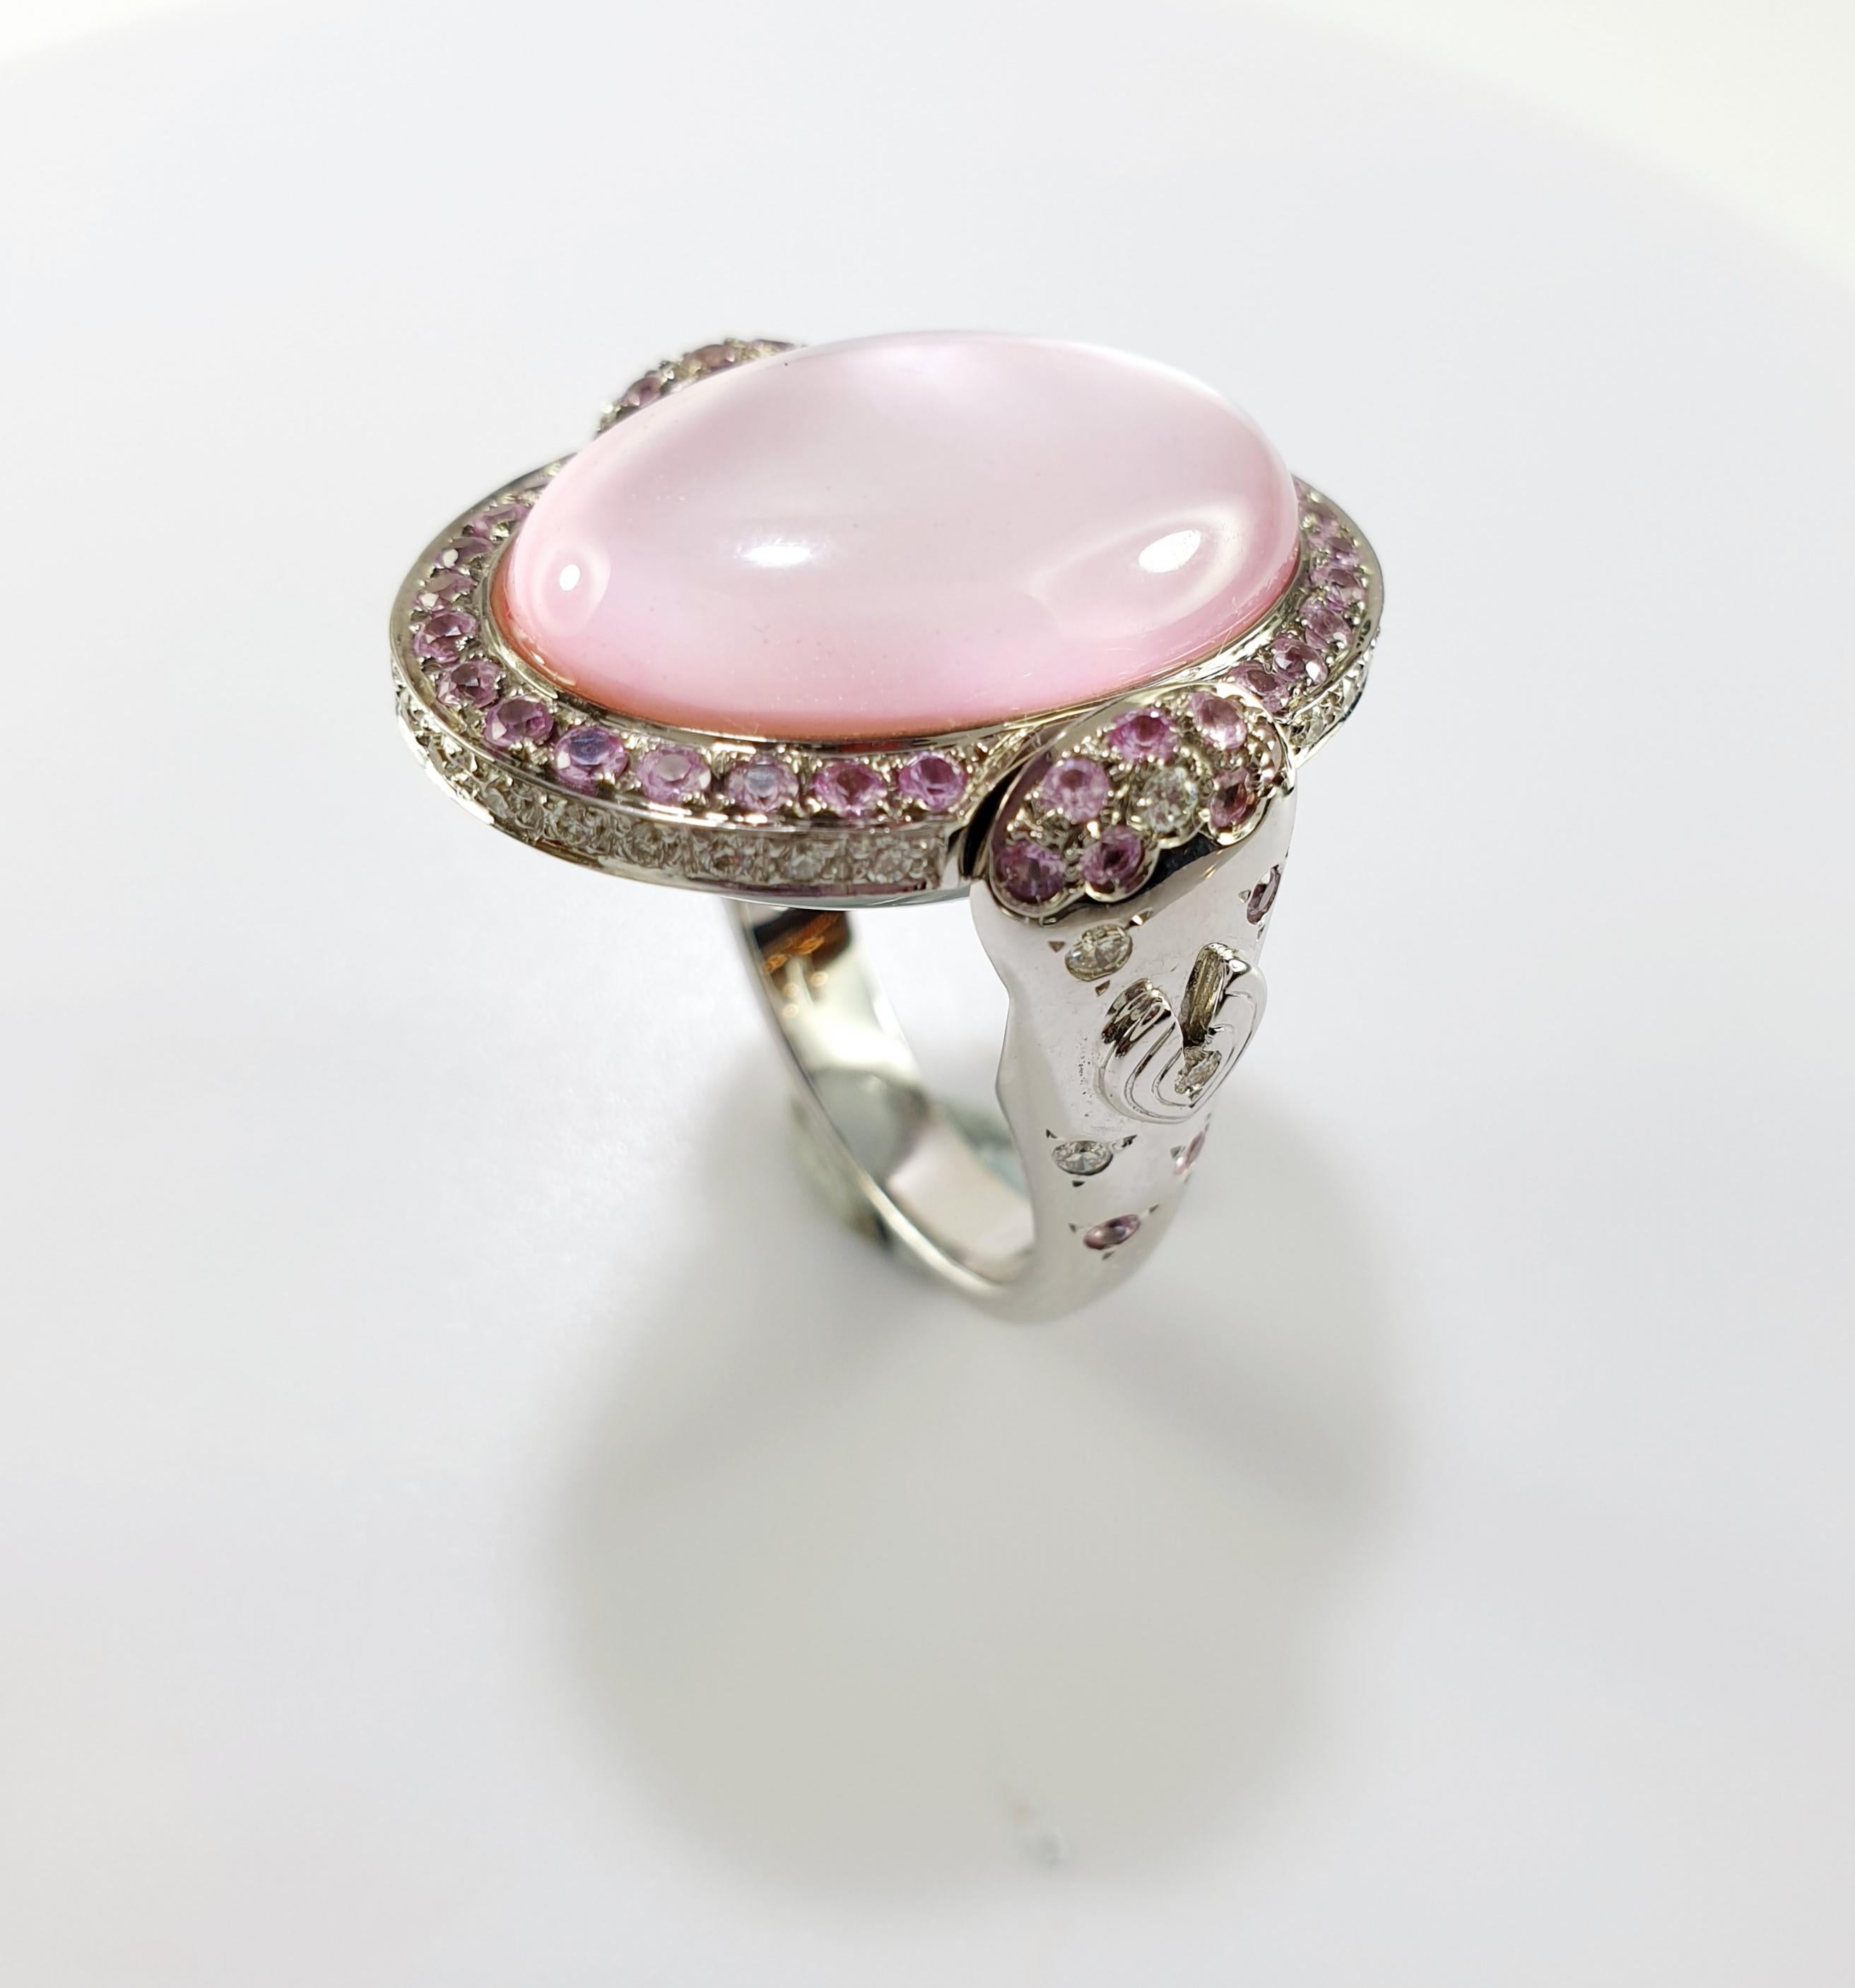 Valente was founded in Milan in 1953 by Tranquillo Valente.   
Valente jewelry is made with a precise craftsman’s expertise using precious gems and special materials, and it immediately achieved prestige and status because of the superior design,